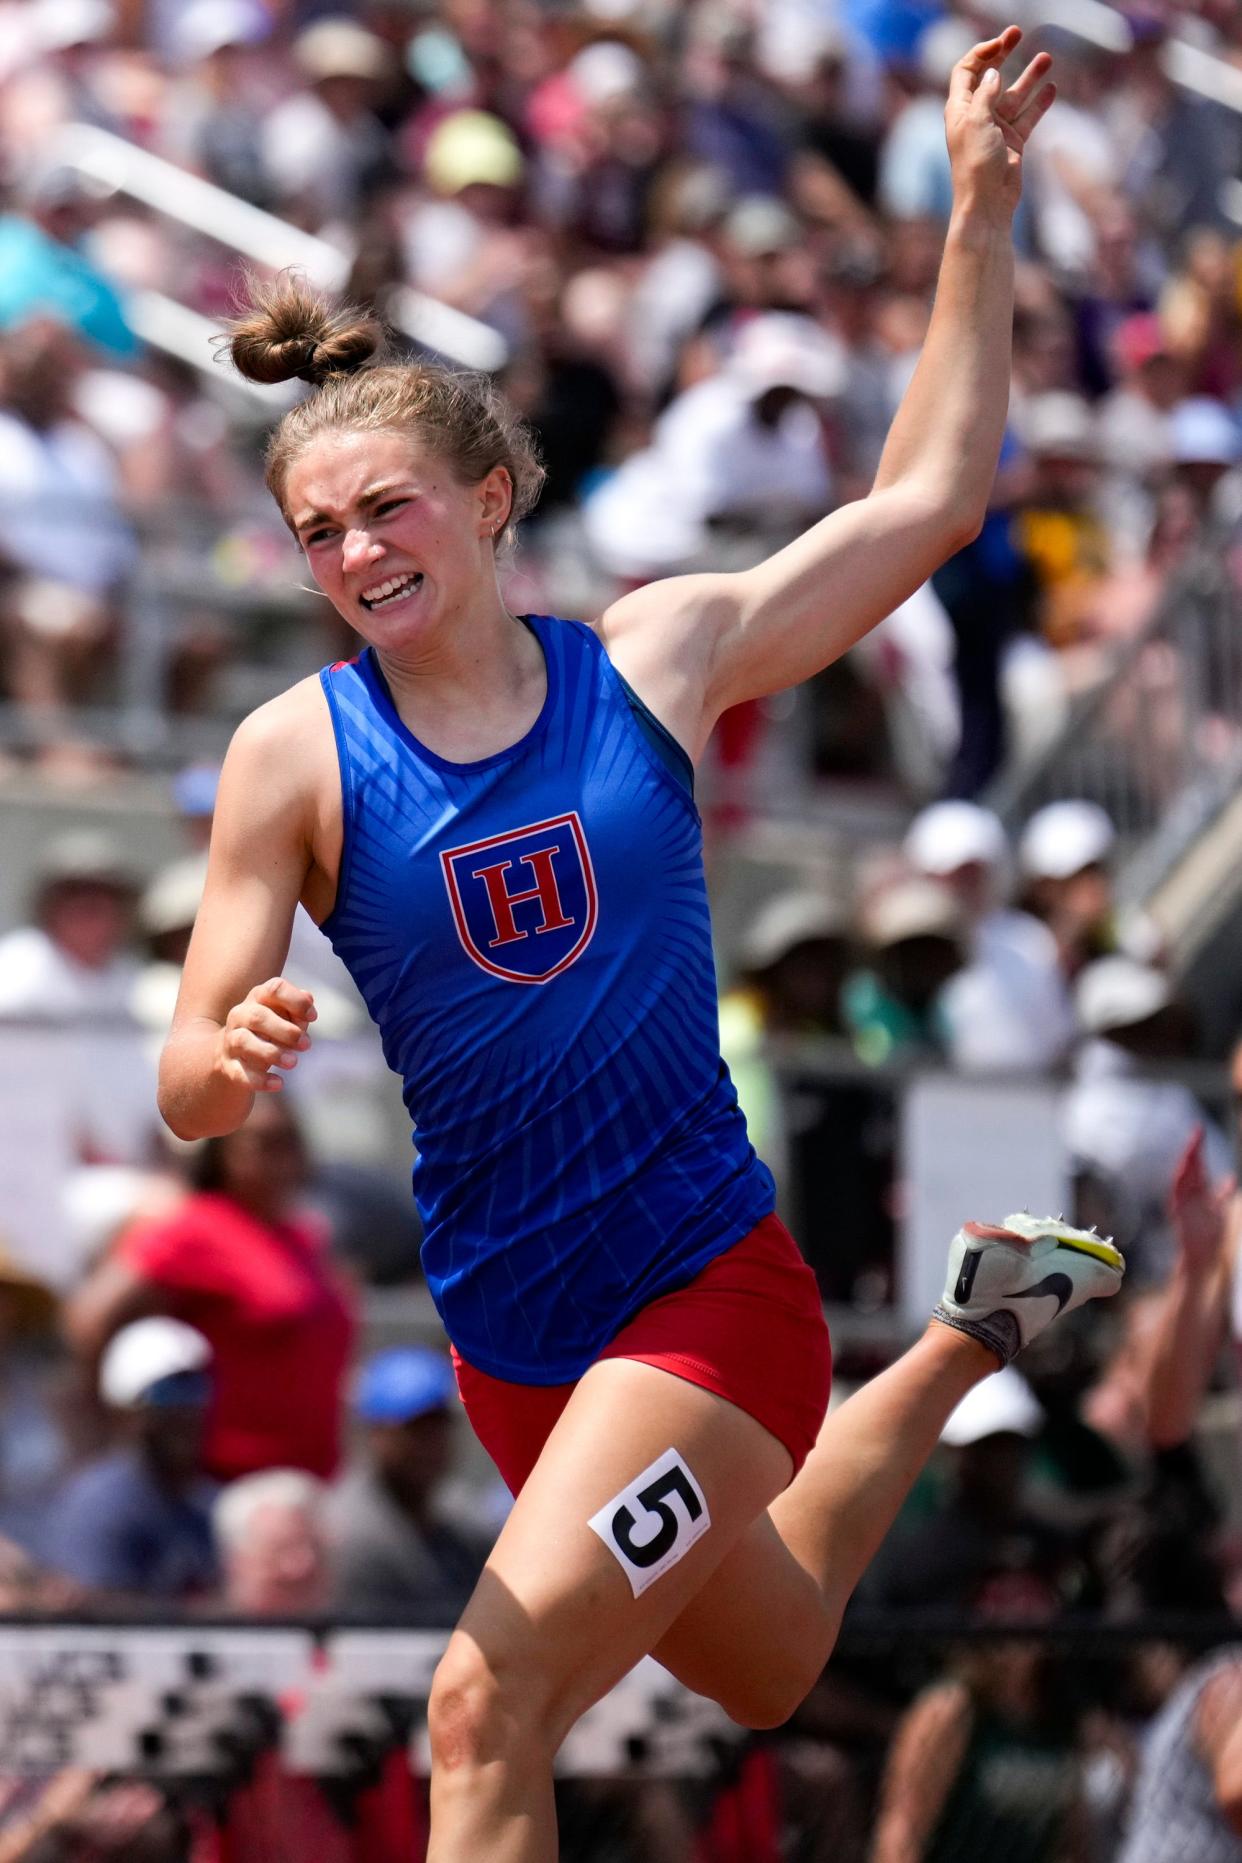 5. Highland's Juliette Laracuente-Huebner won four Division II state track and field titles.